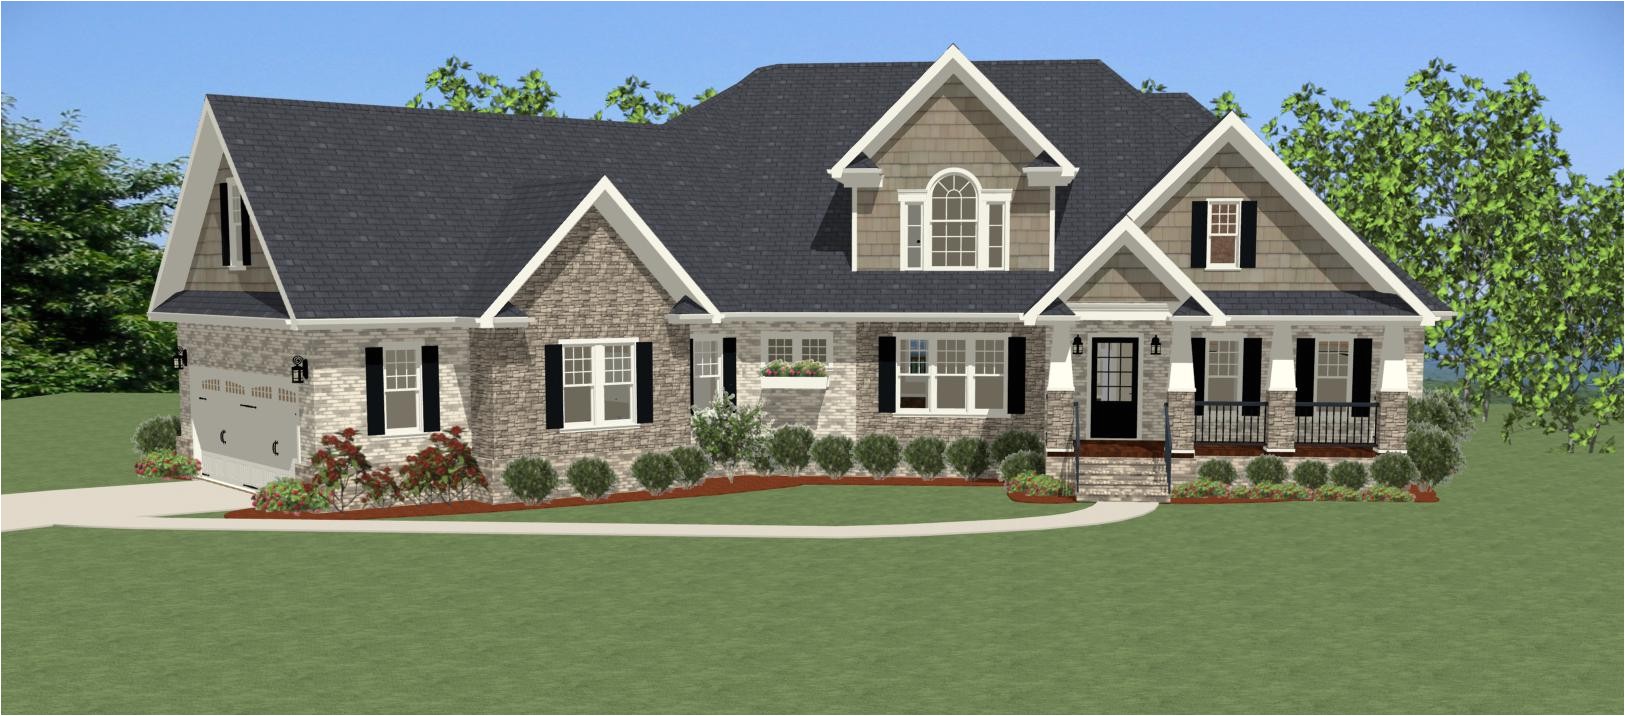 we have a winner introducing the stoney creek house plan